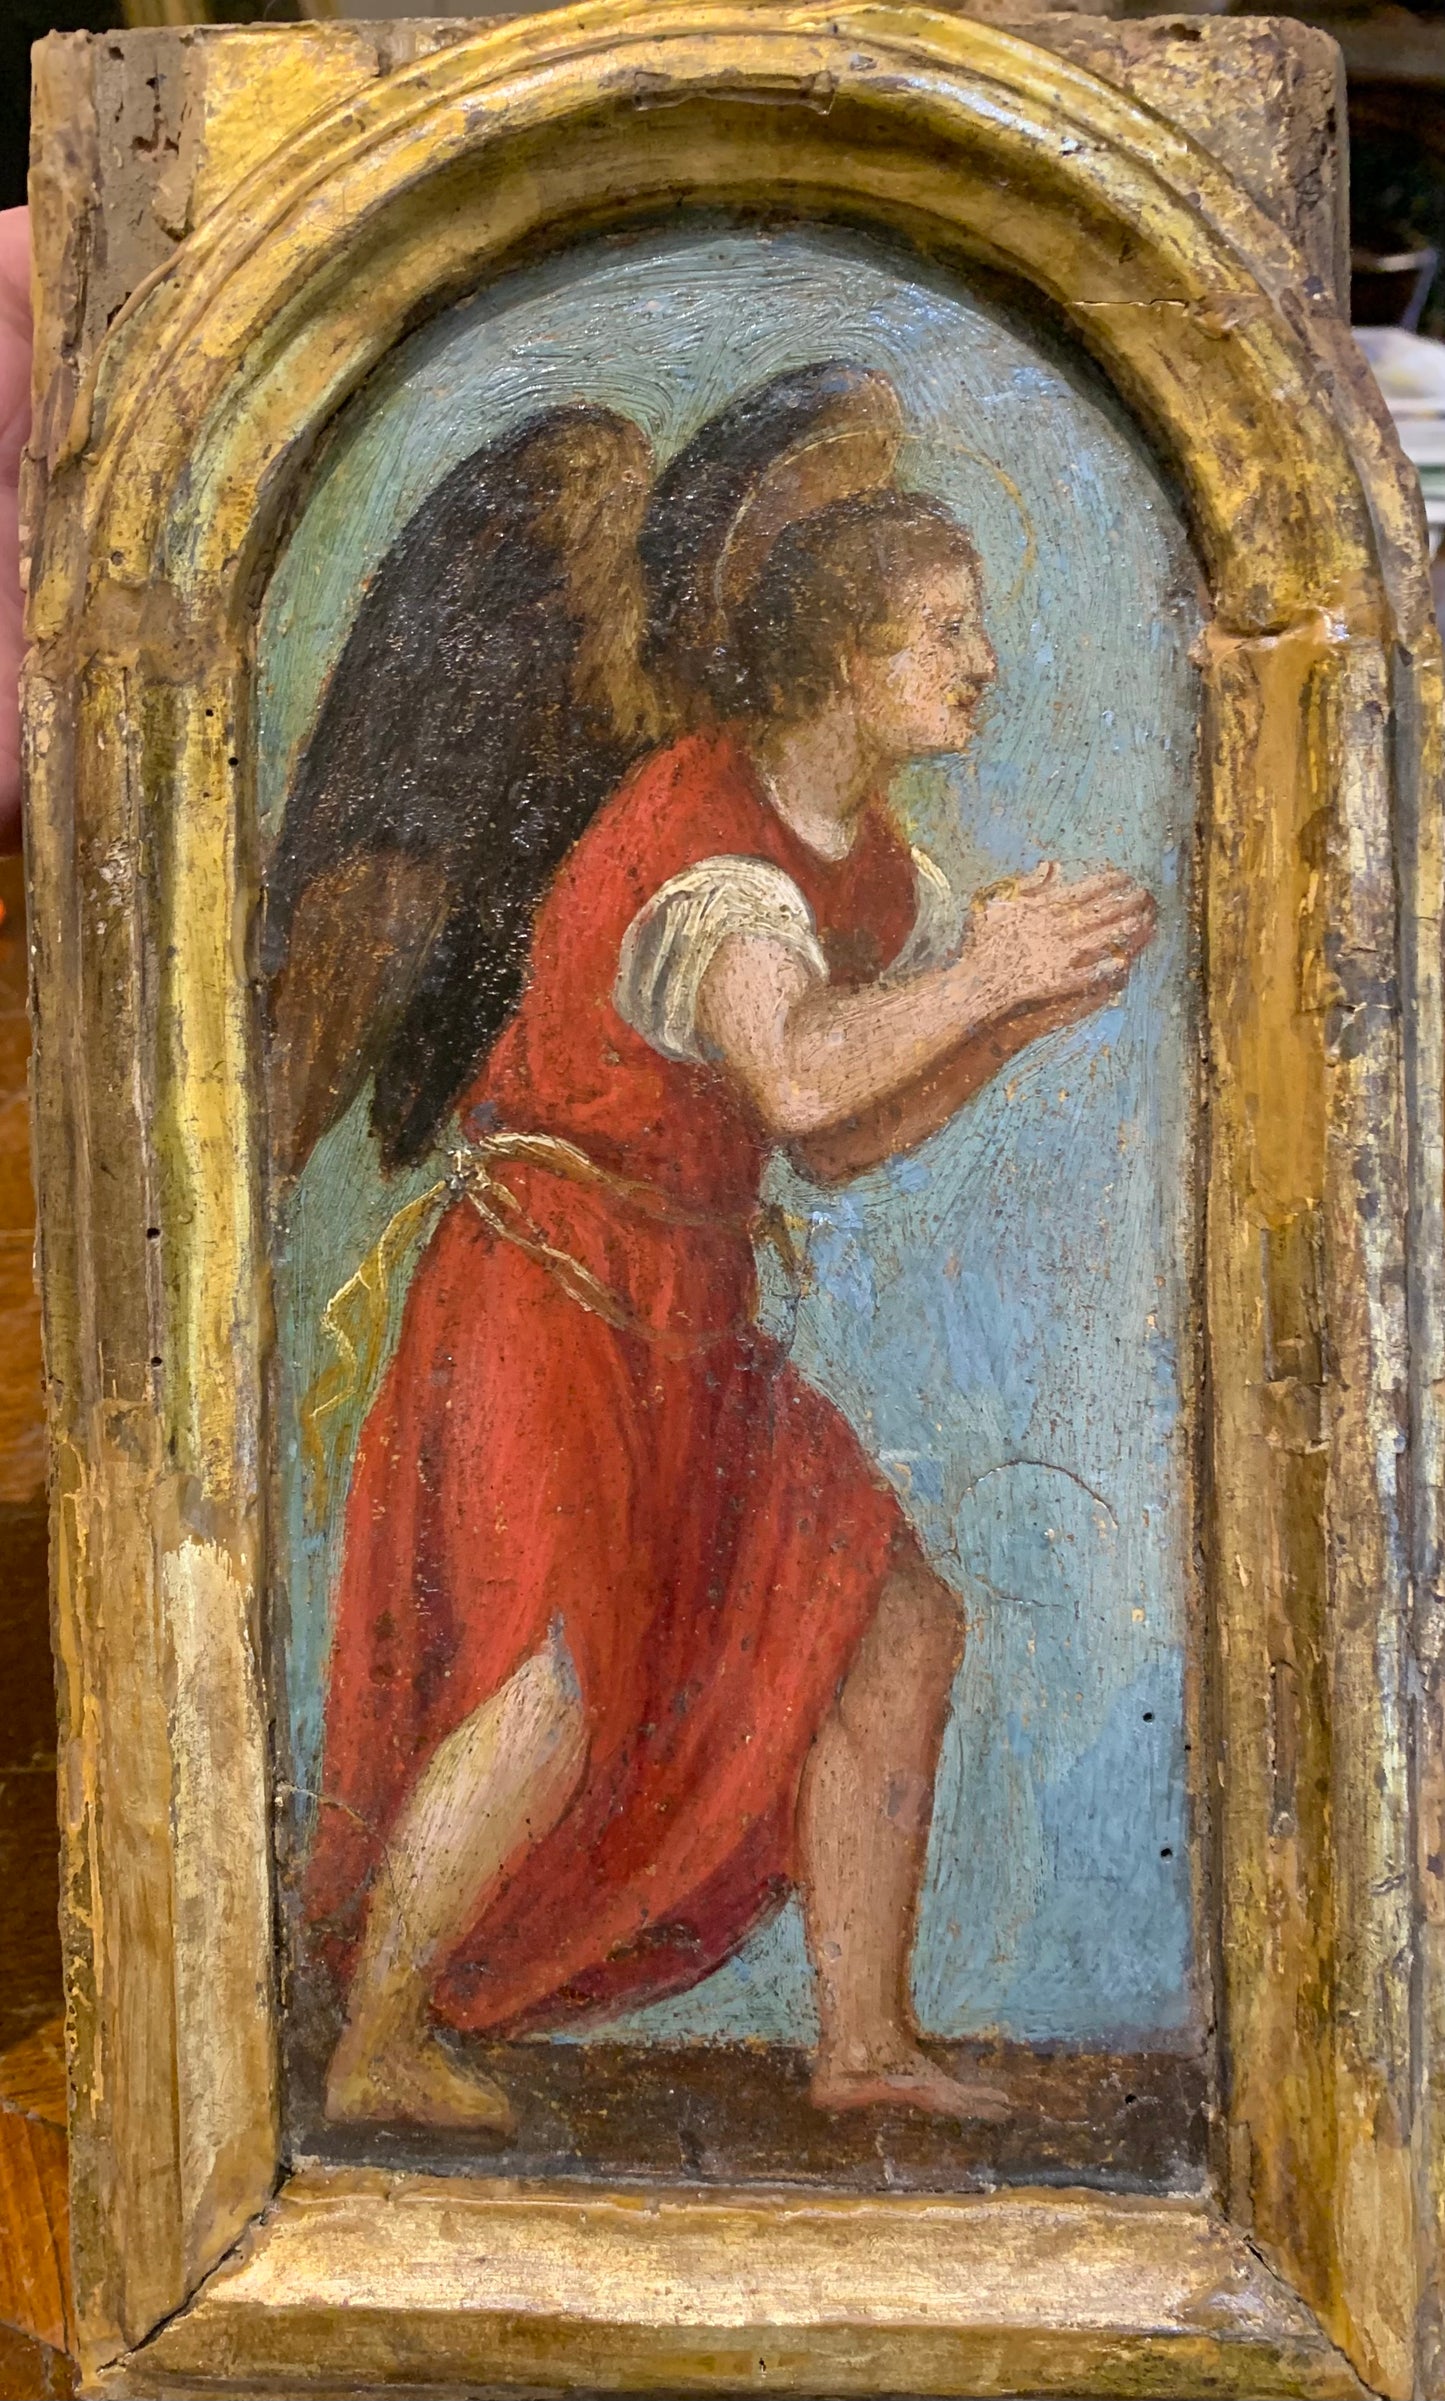 The tabernacle door with the Angel. Italy. Early 17th century.